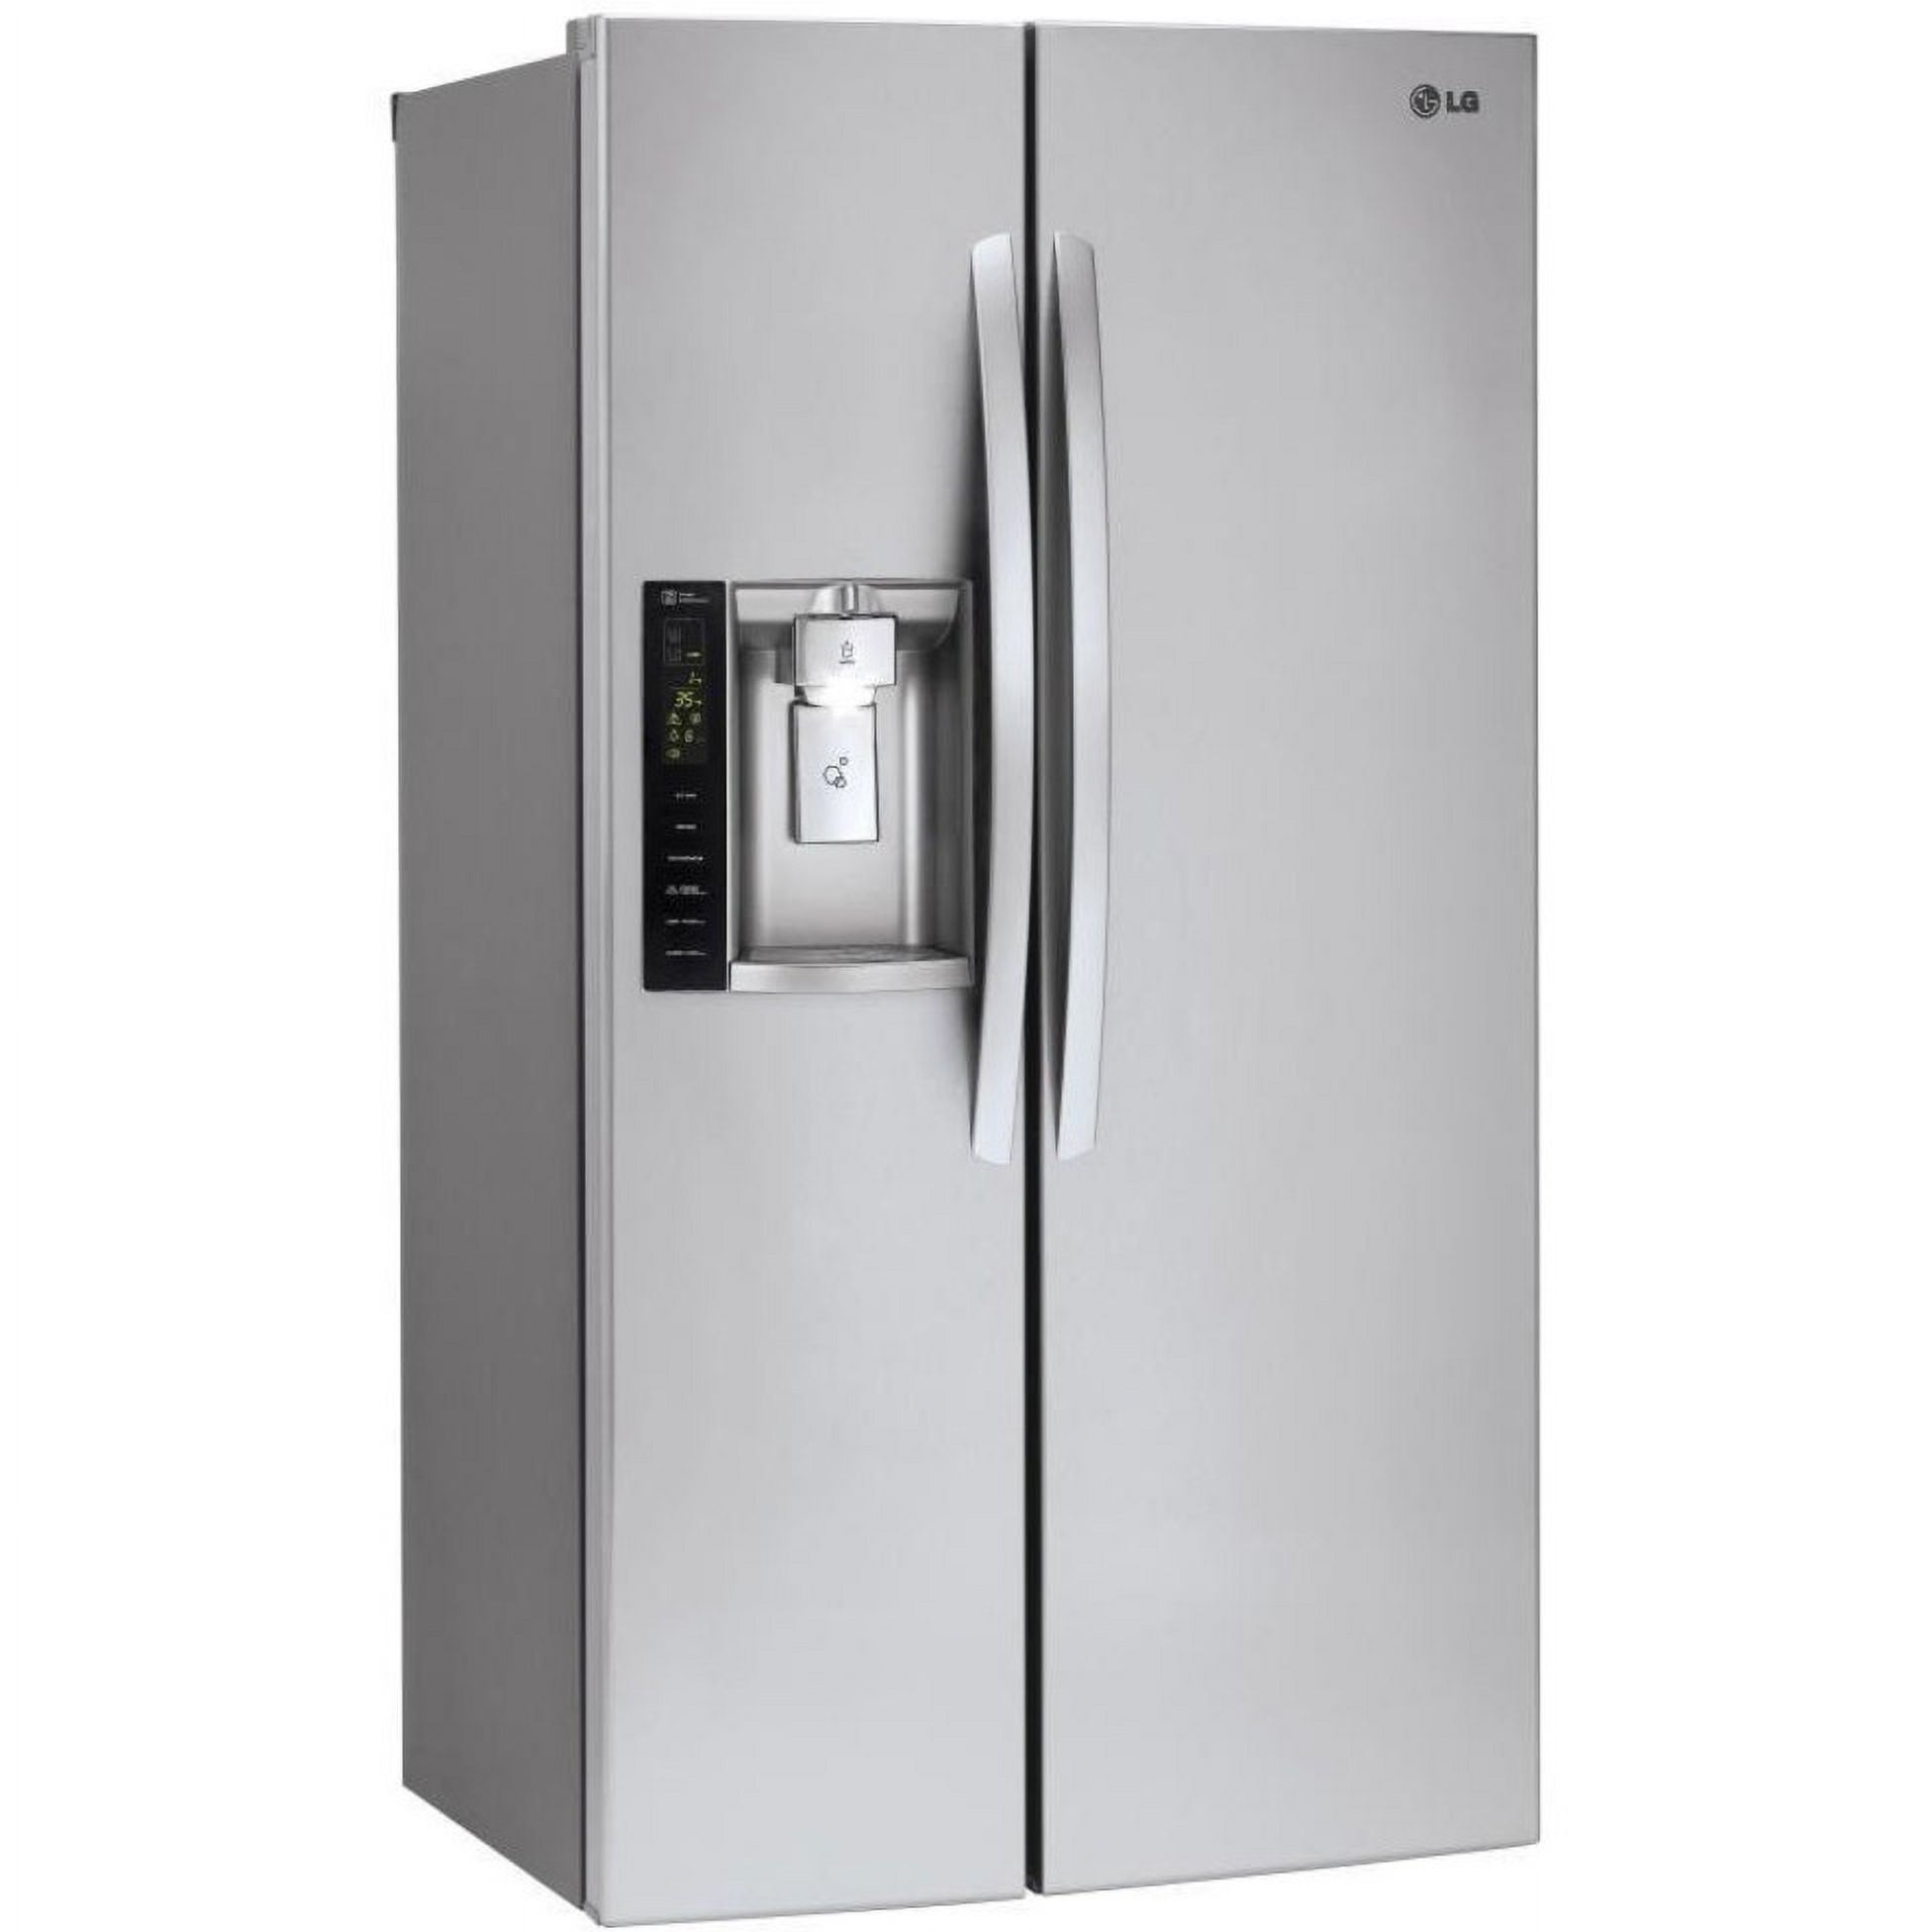 LG 22 cu. ft. Smart wi-fi Enabled Side-by-Side Counter-Depth Refrigerator - image 3 of 10